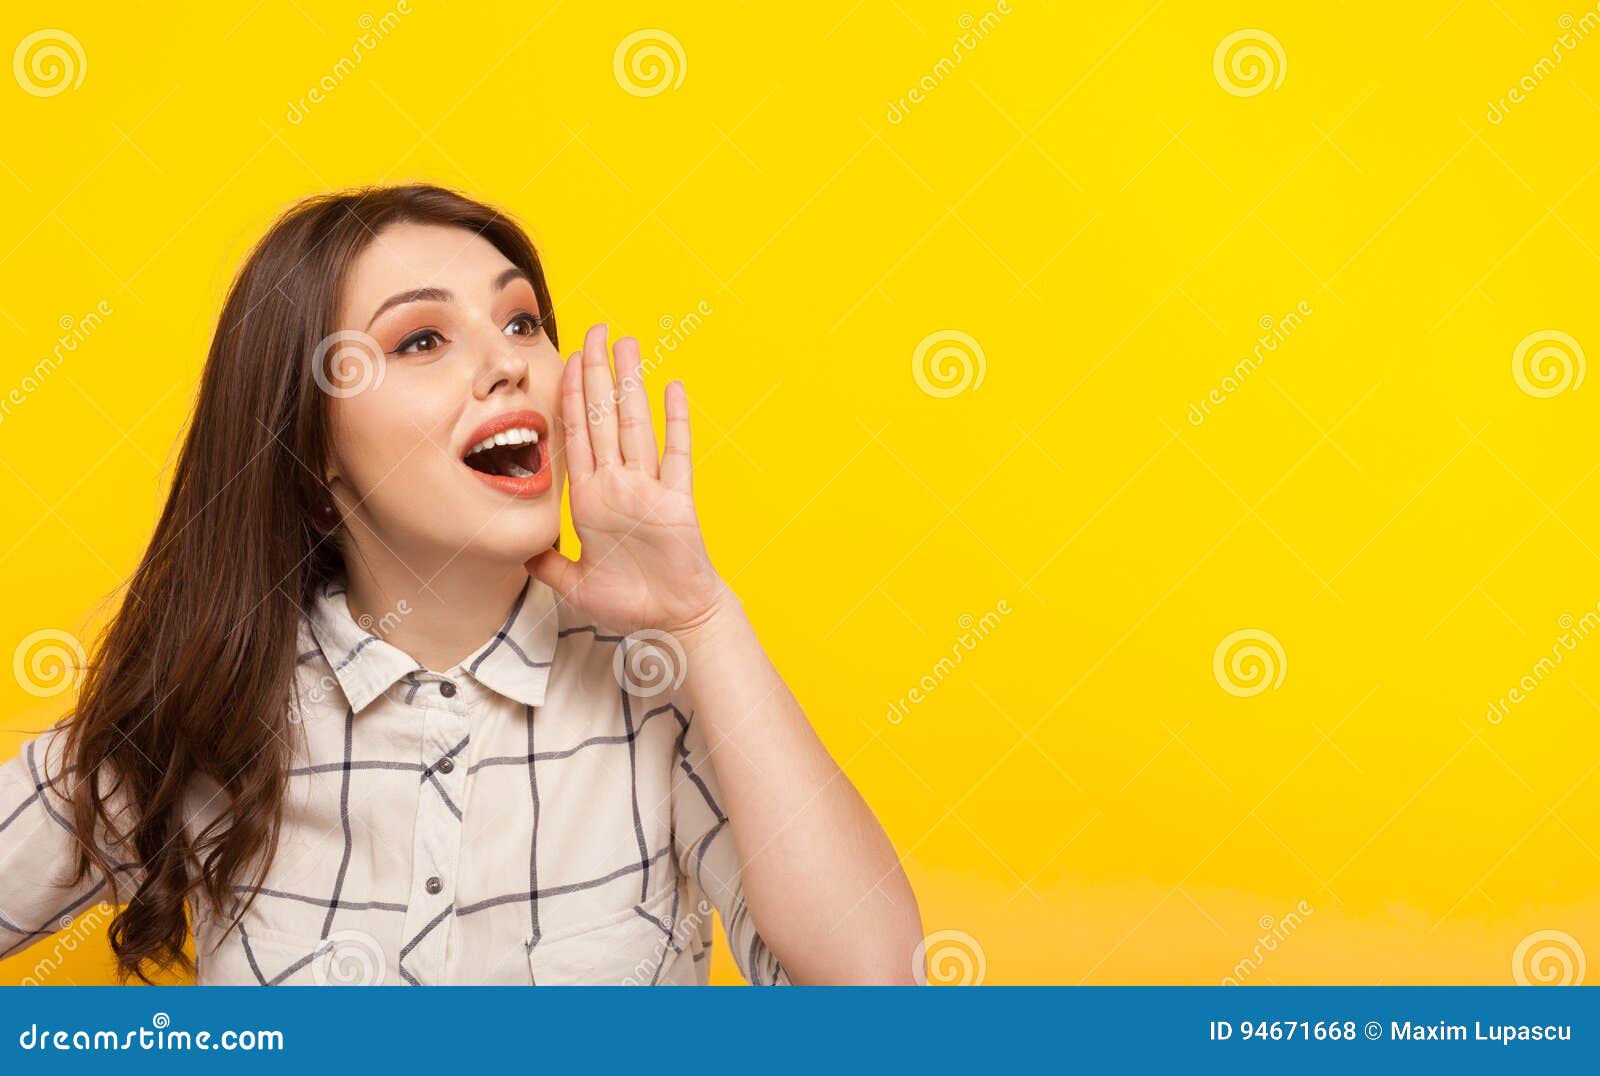 woman posing on yellow and calling